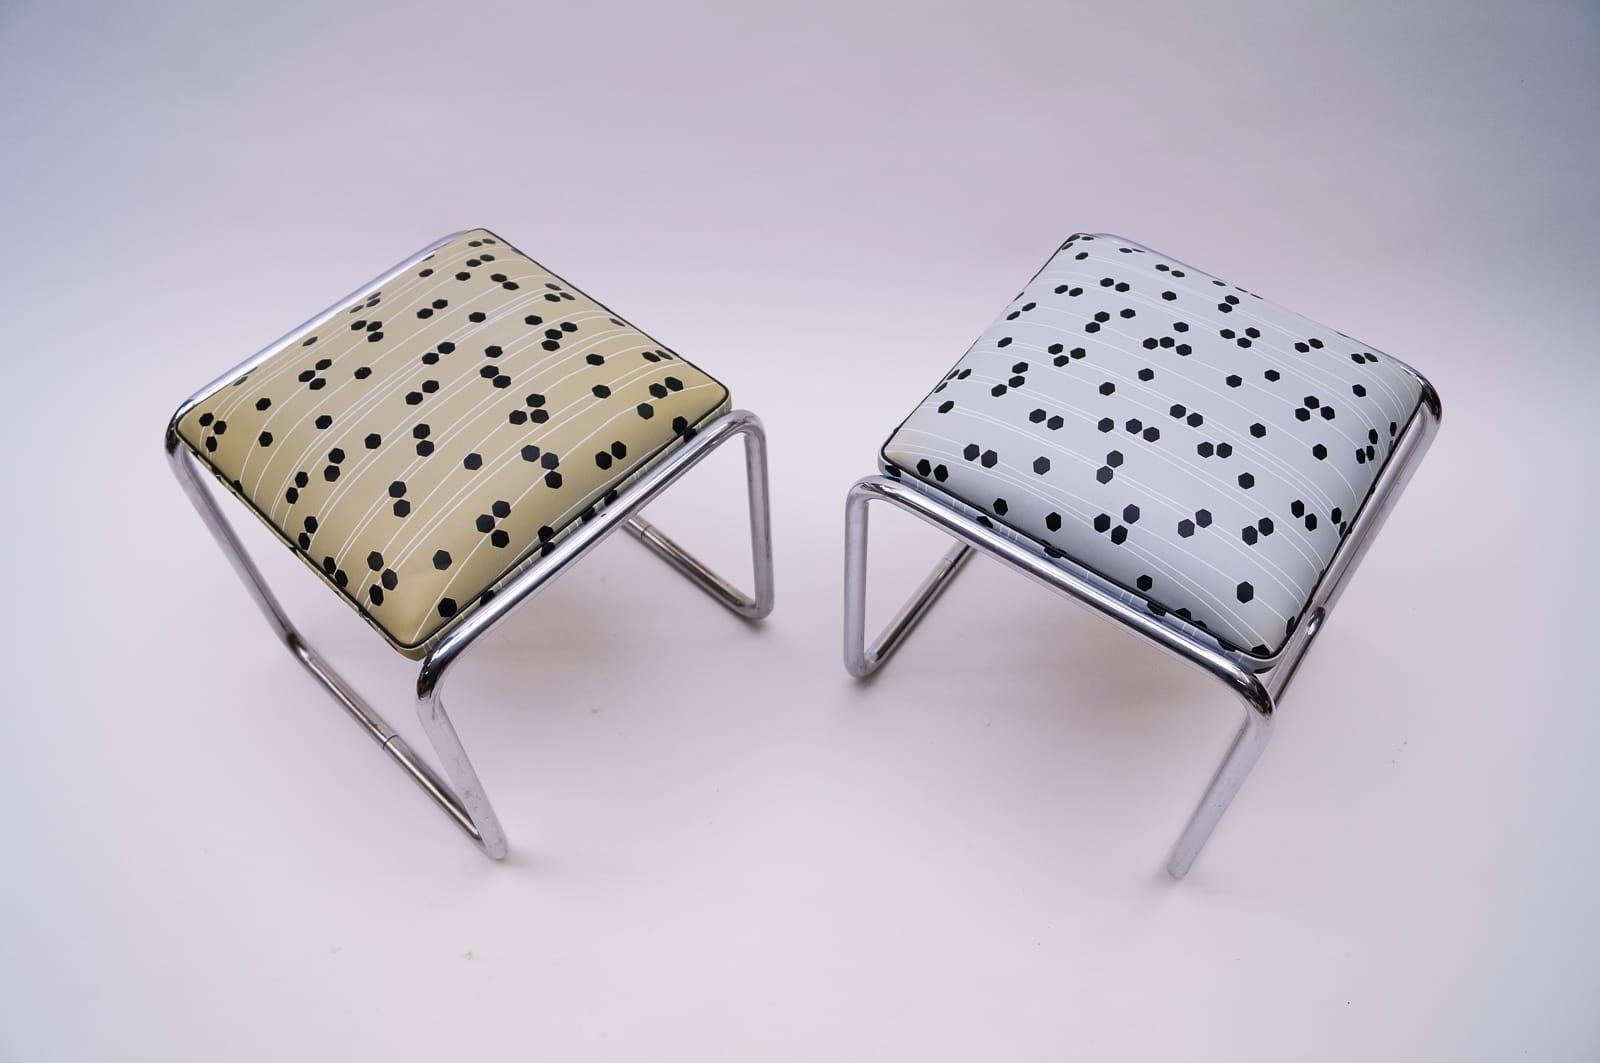 Pair of Tubular Steel Bauhaus Stools with Graphic Patterns, 1940s, Germany 5